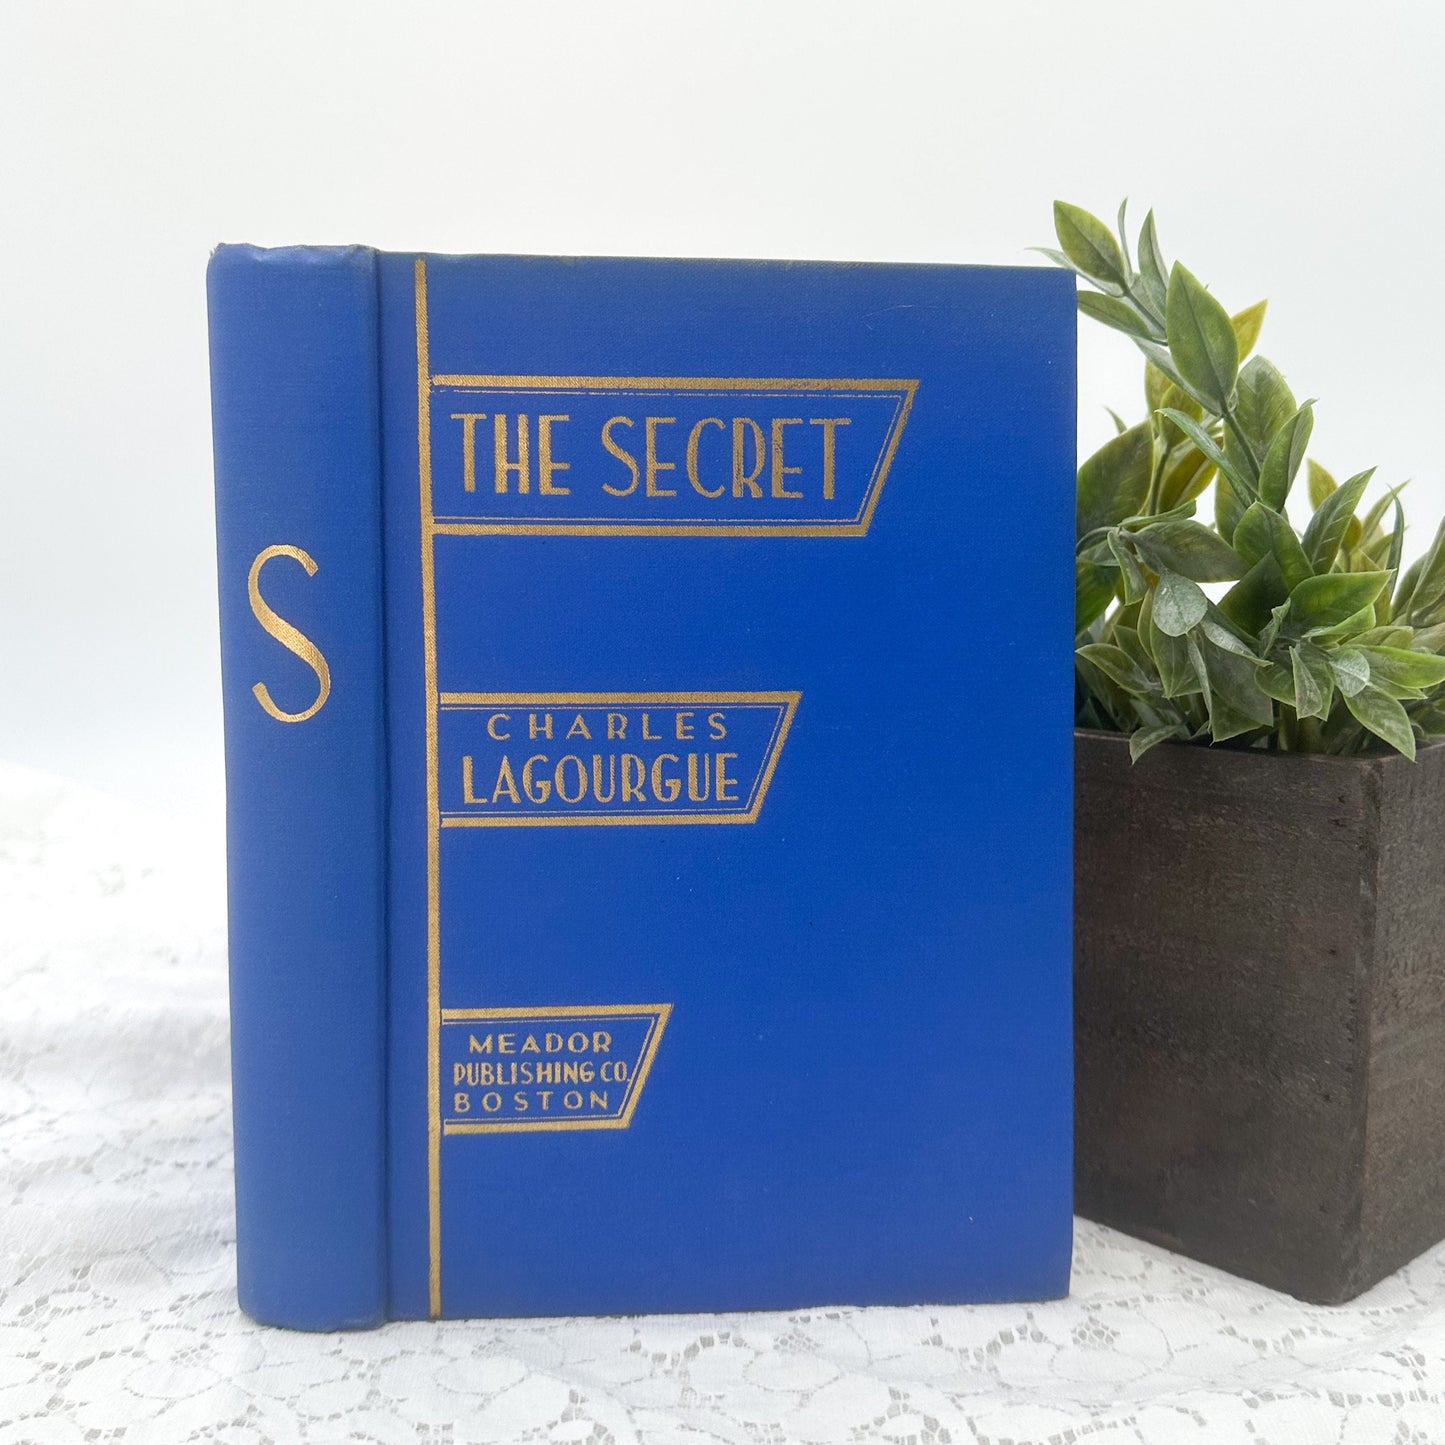 The Secret by Charles Lagourgue, Signed by Author